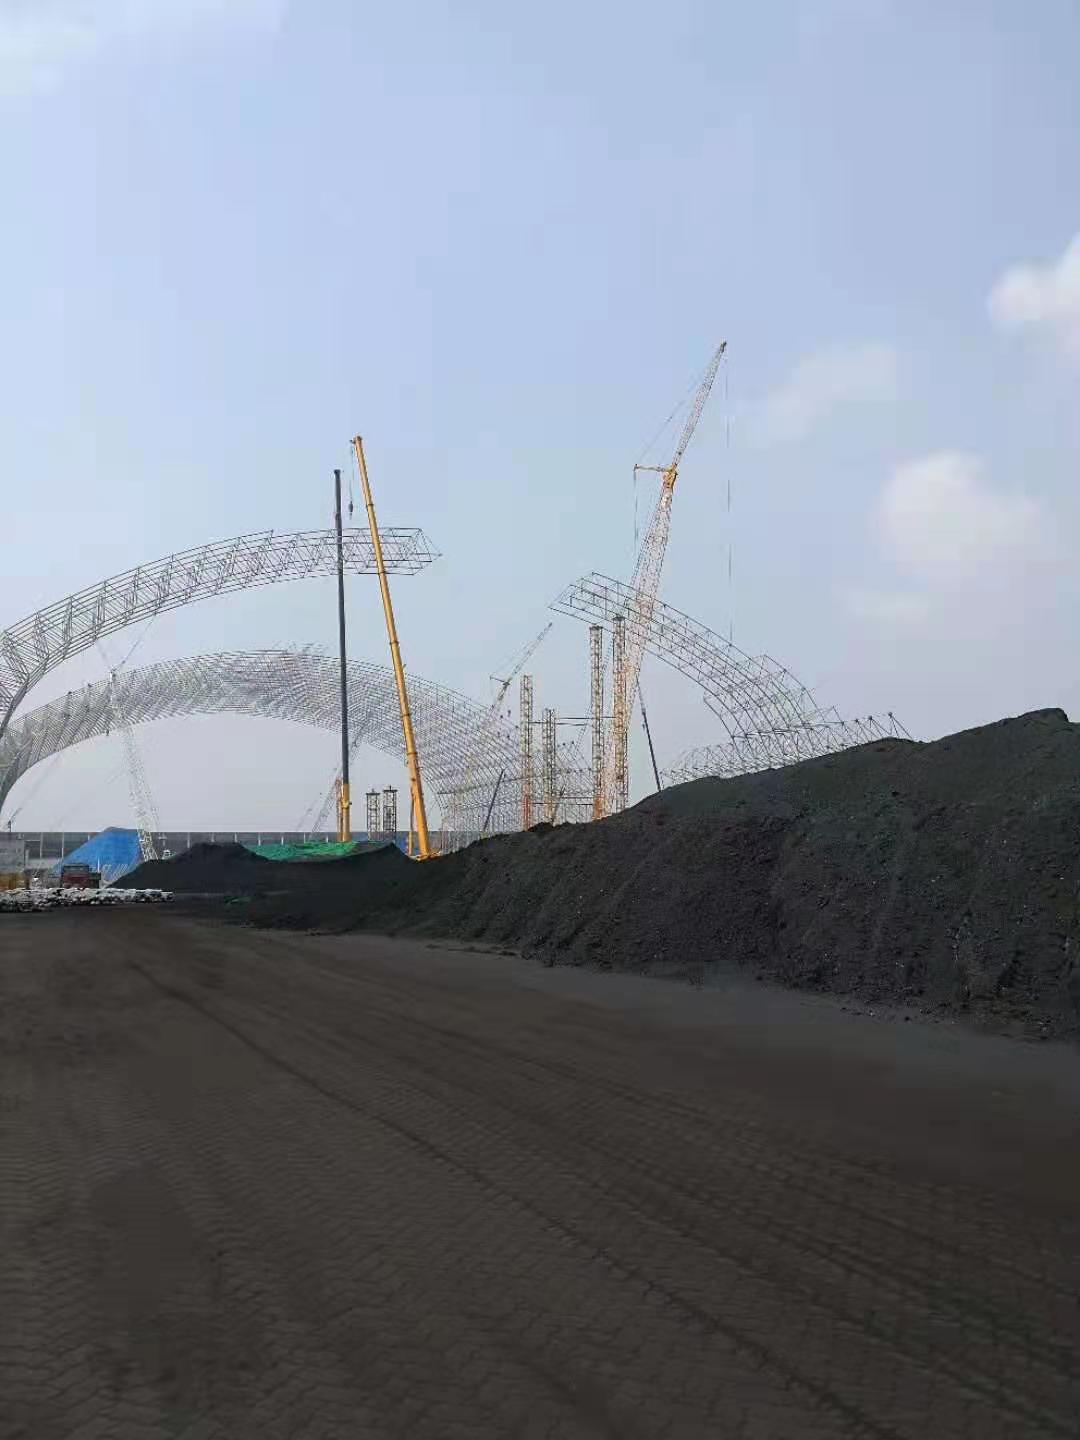 Space frame industrial duplex coal storage shed project. The total length is 700 meters, the total span is 188 meters, the total height is 57 meters, the construction time is 90 days, and the construction personnel are 37 people. 